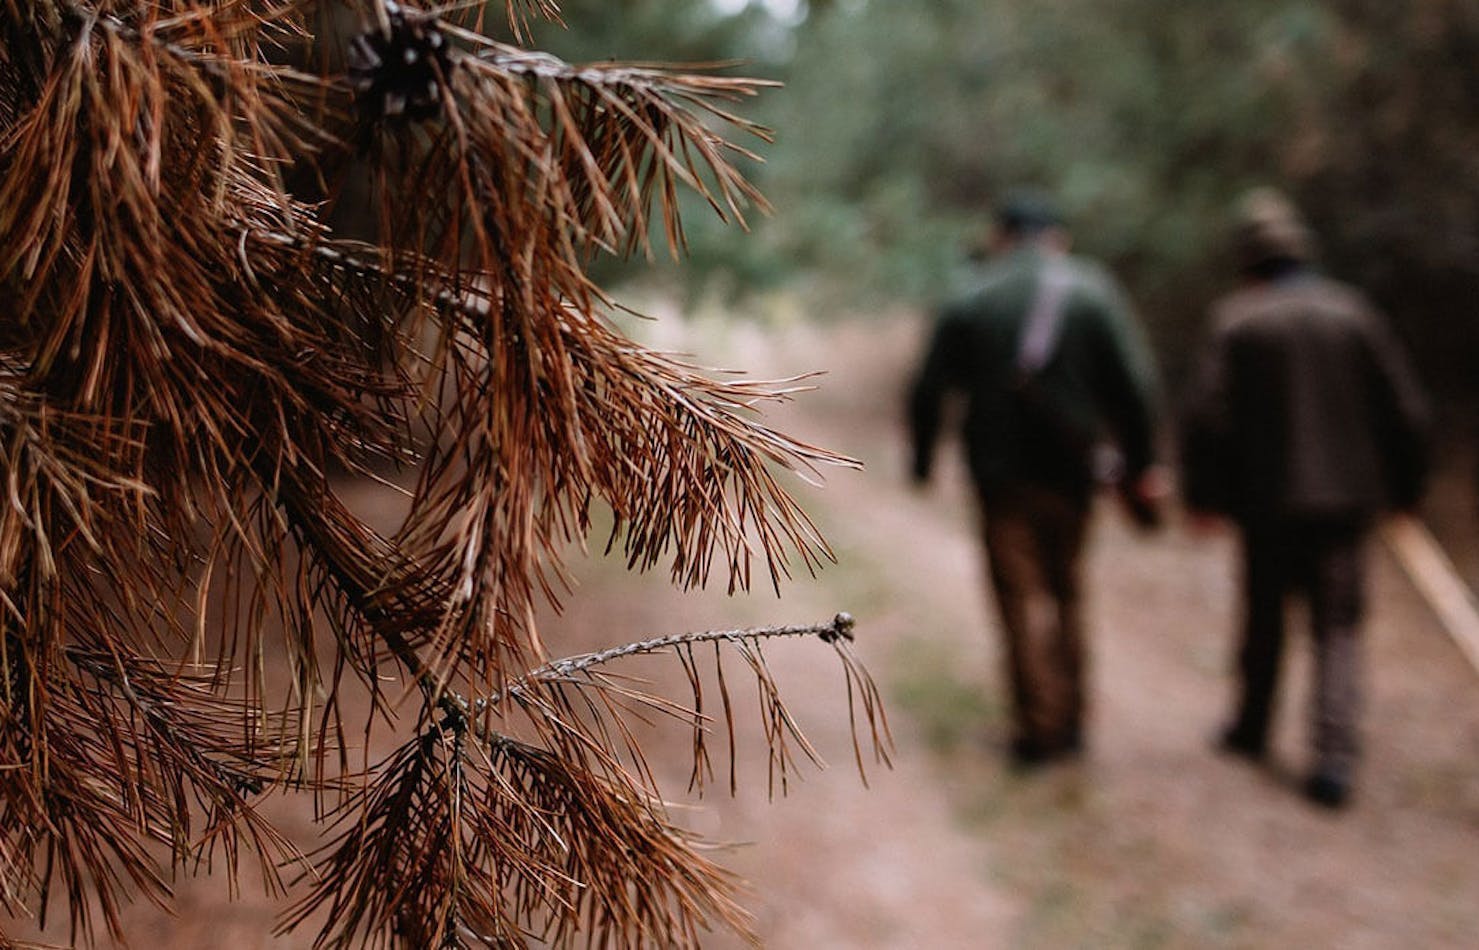 Two hunters on trail blurred